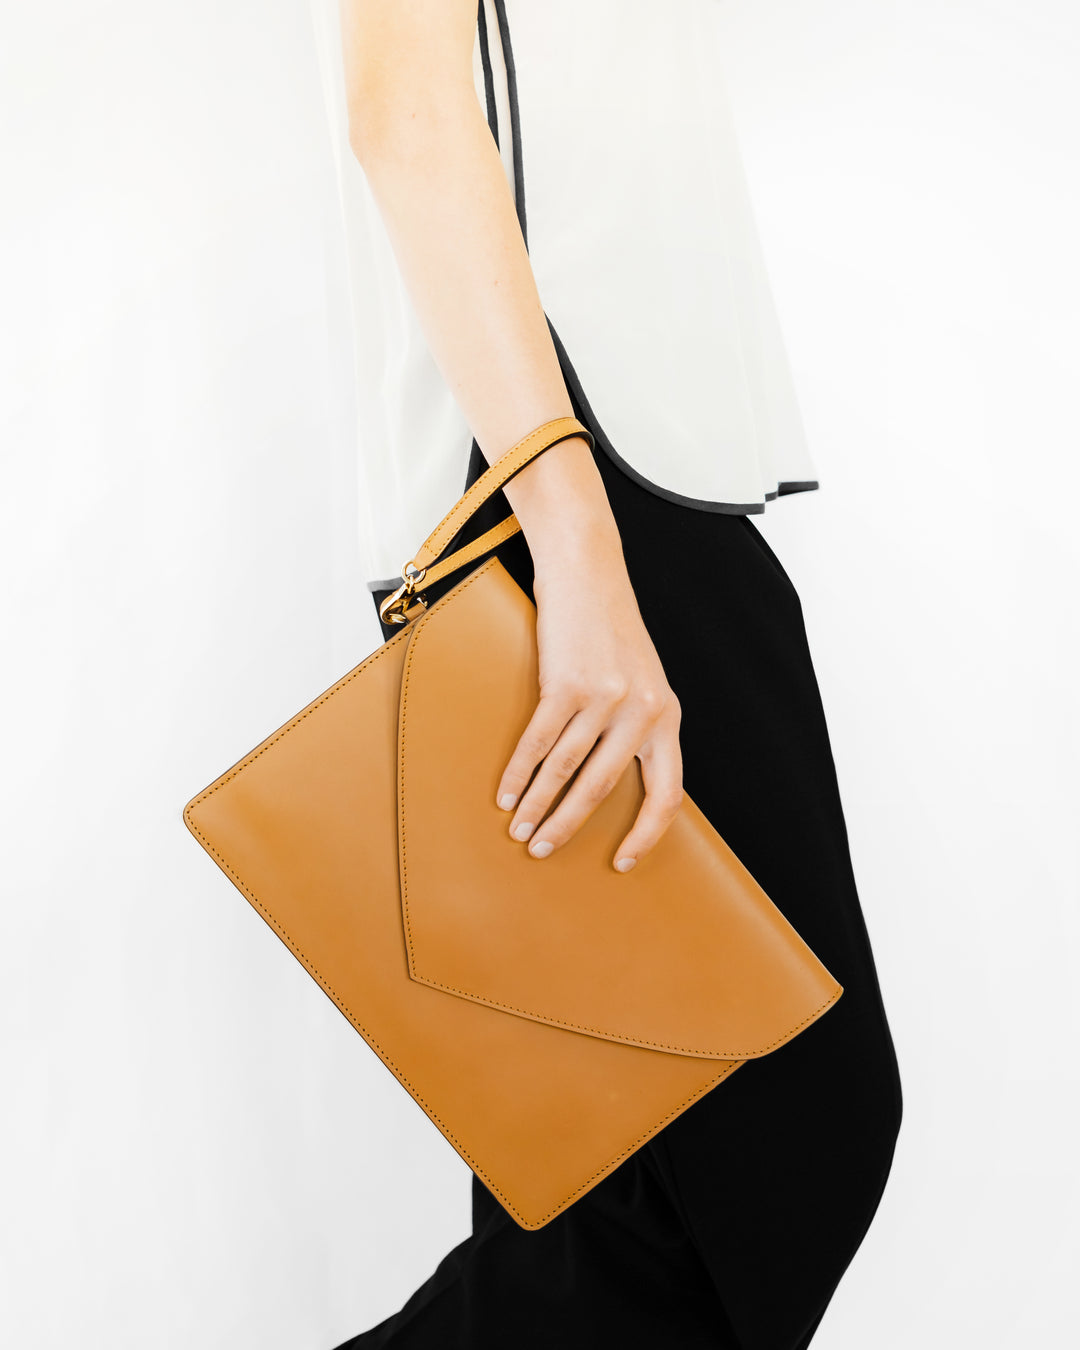 Envelope Clutch handcrafted in Italy and designed in San Francisco